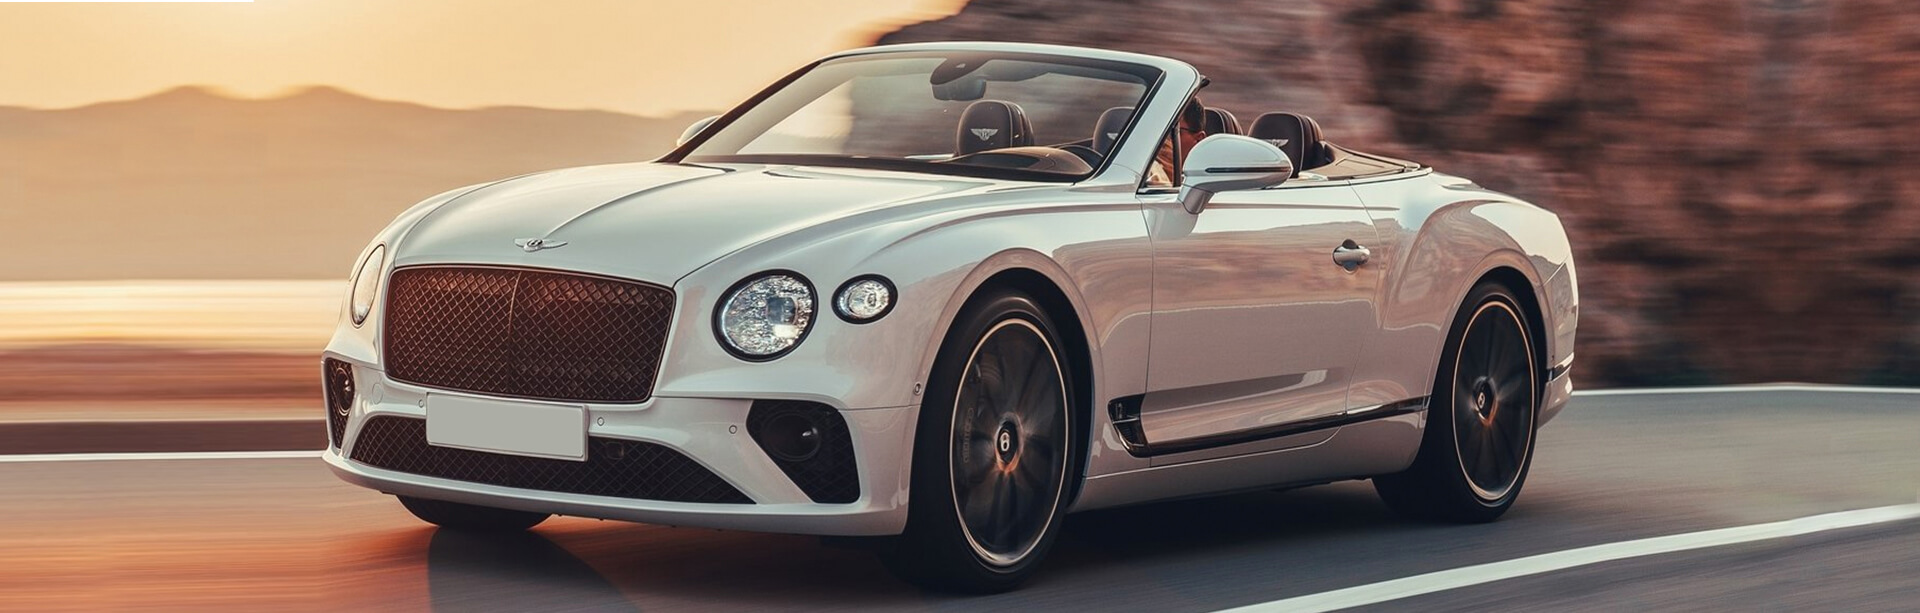 European Import Service Specializing in Bentley Service in Newport Beach. White Bentley Convertable Driving